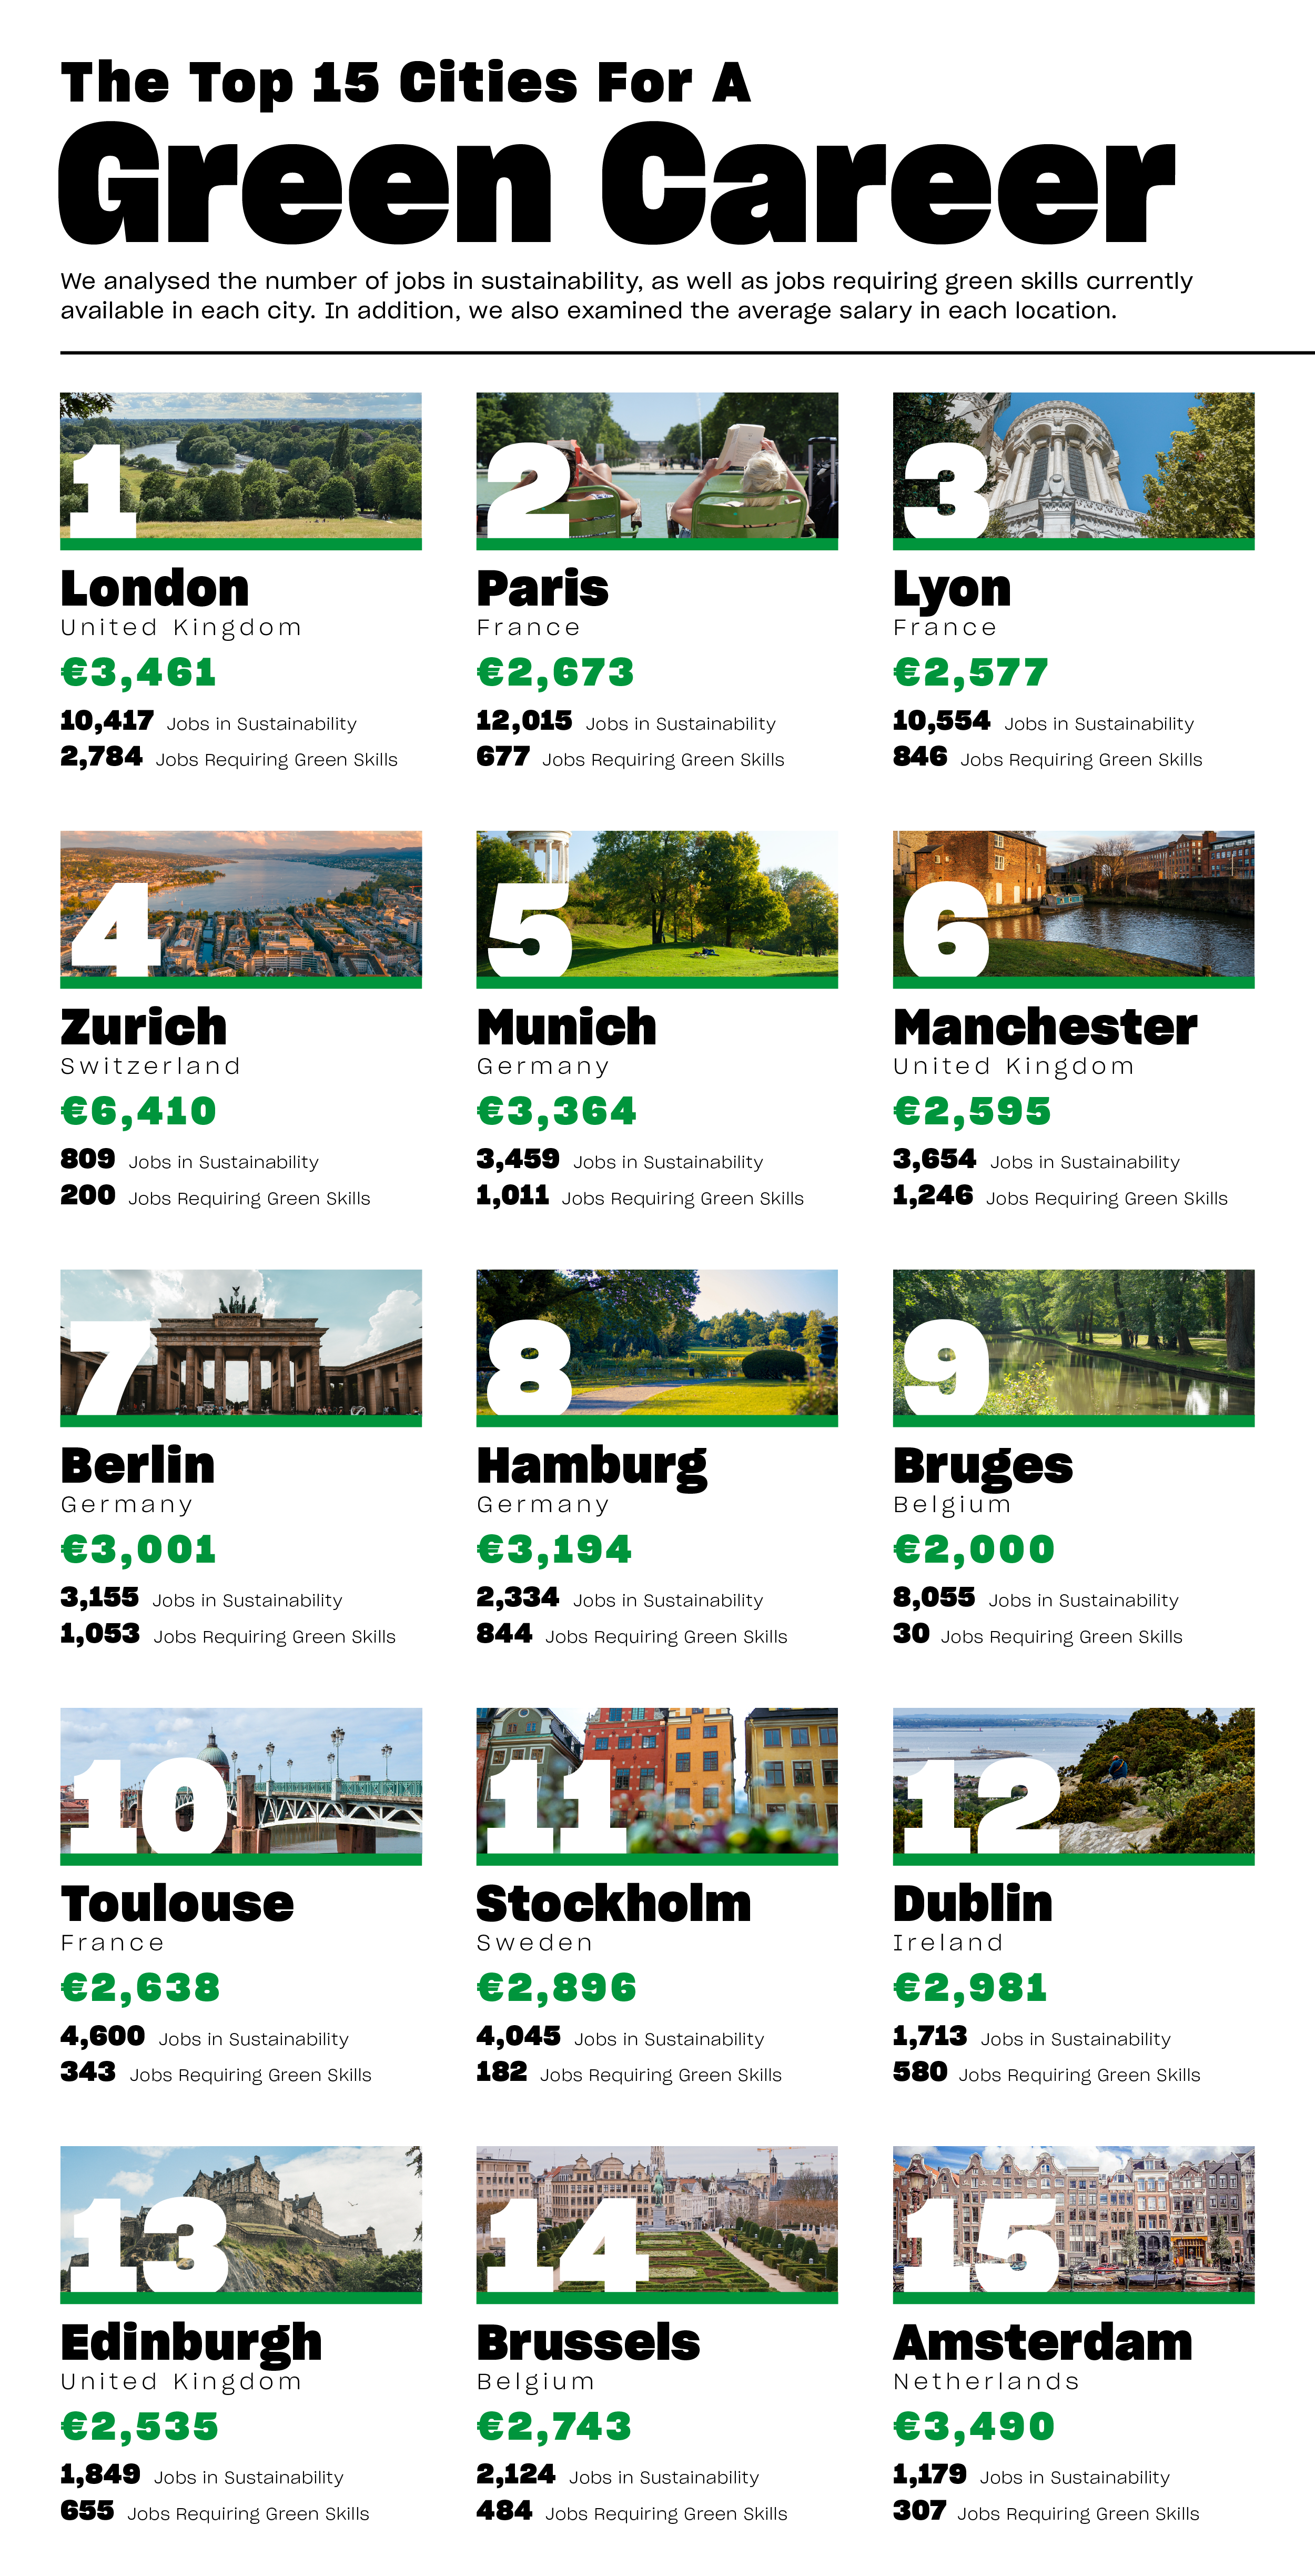 Top 15 cities for a green career